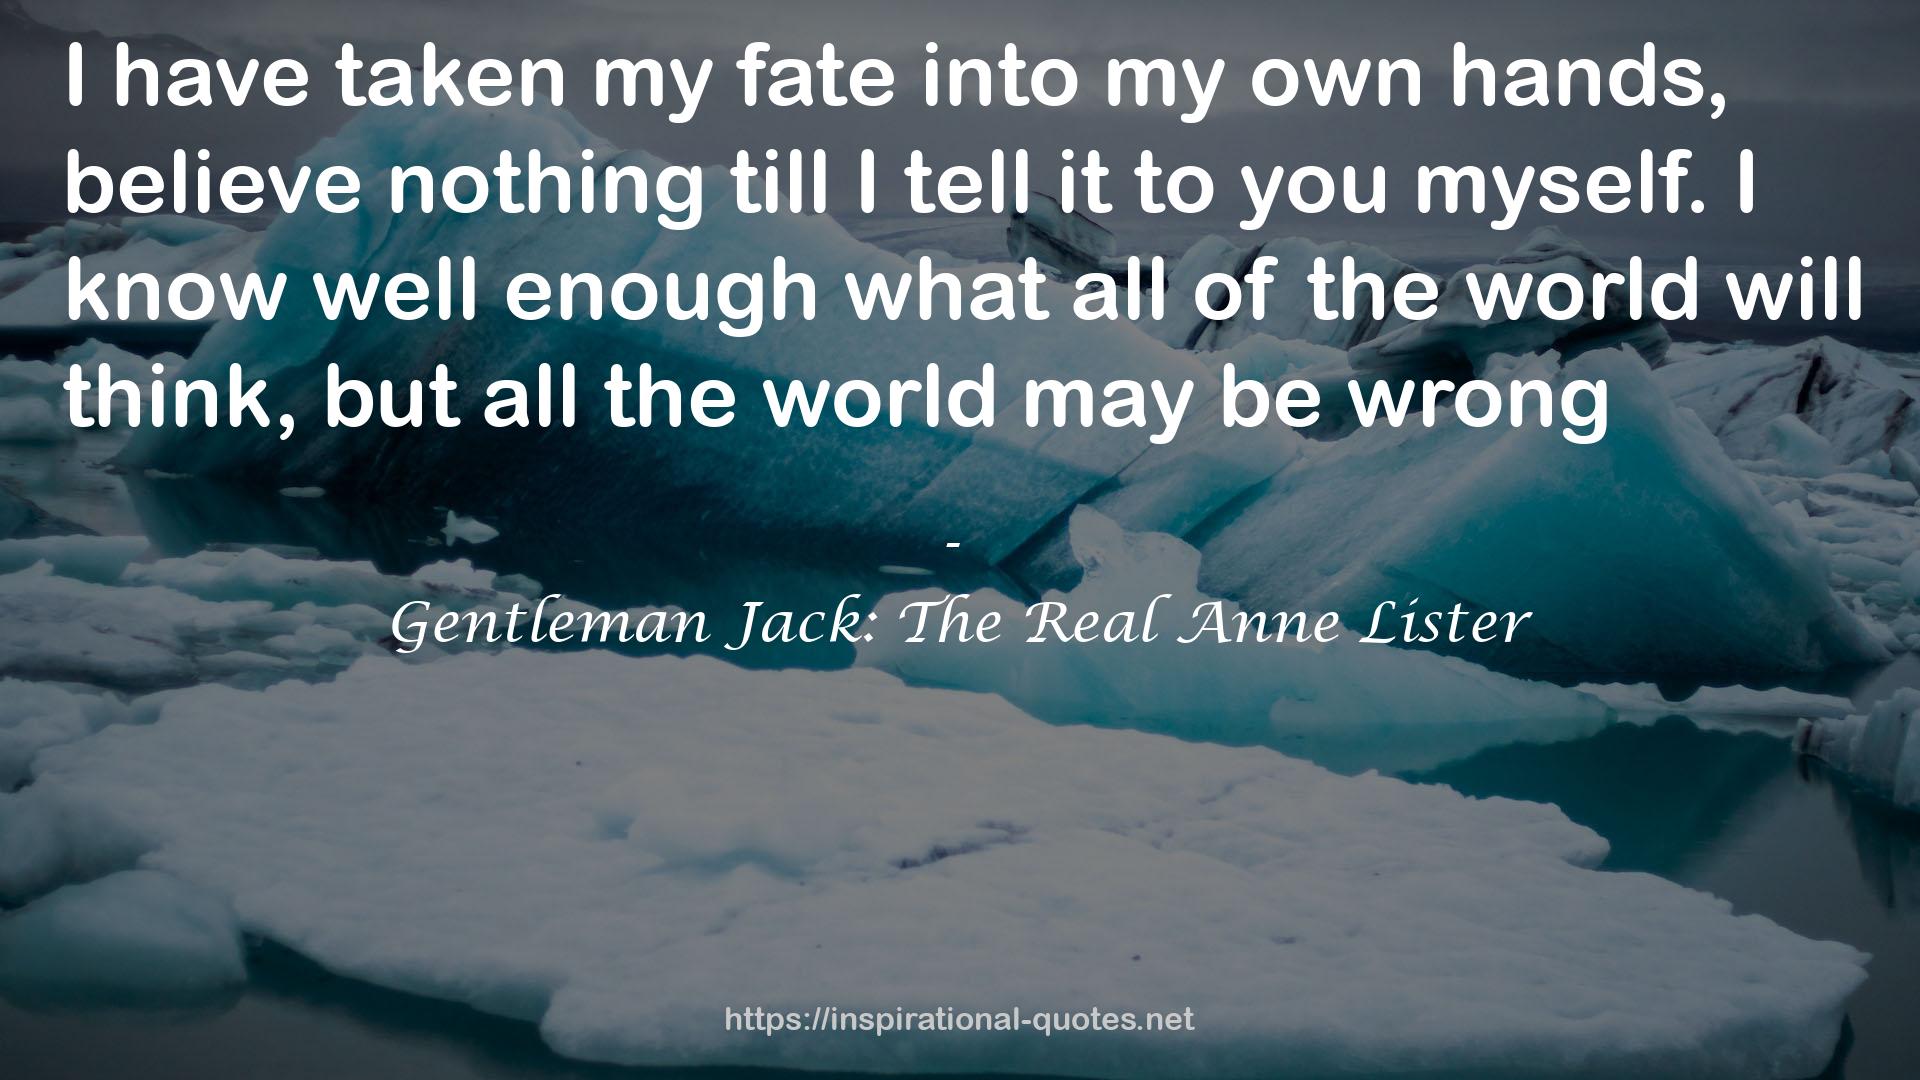 Gentleman Jack: The Real Anne Lister QUOTES